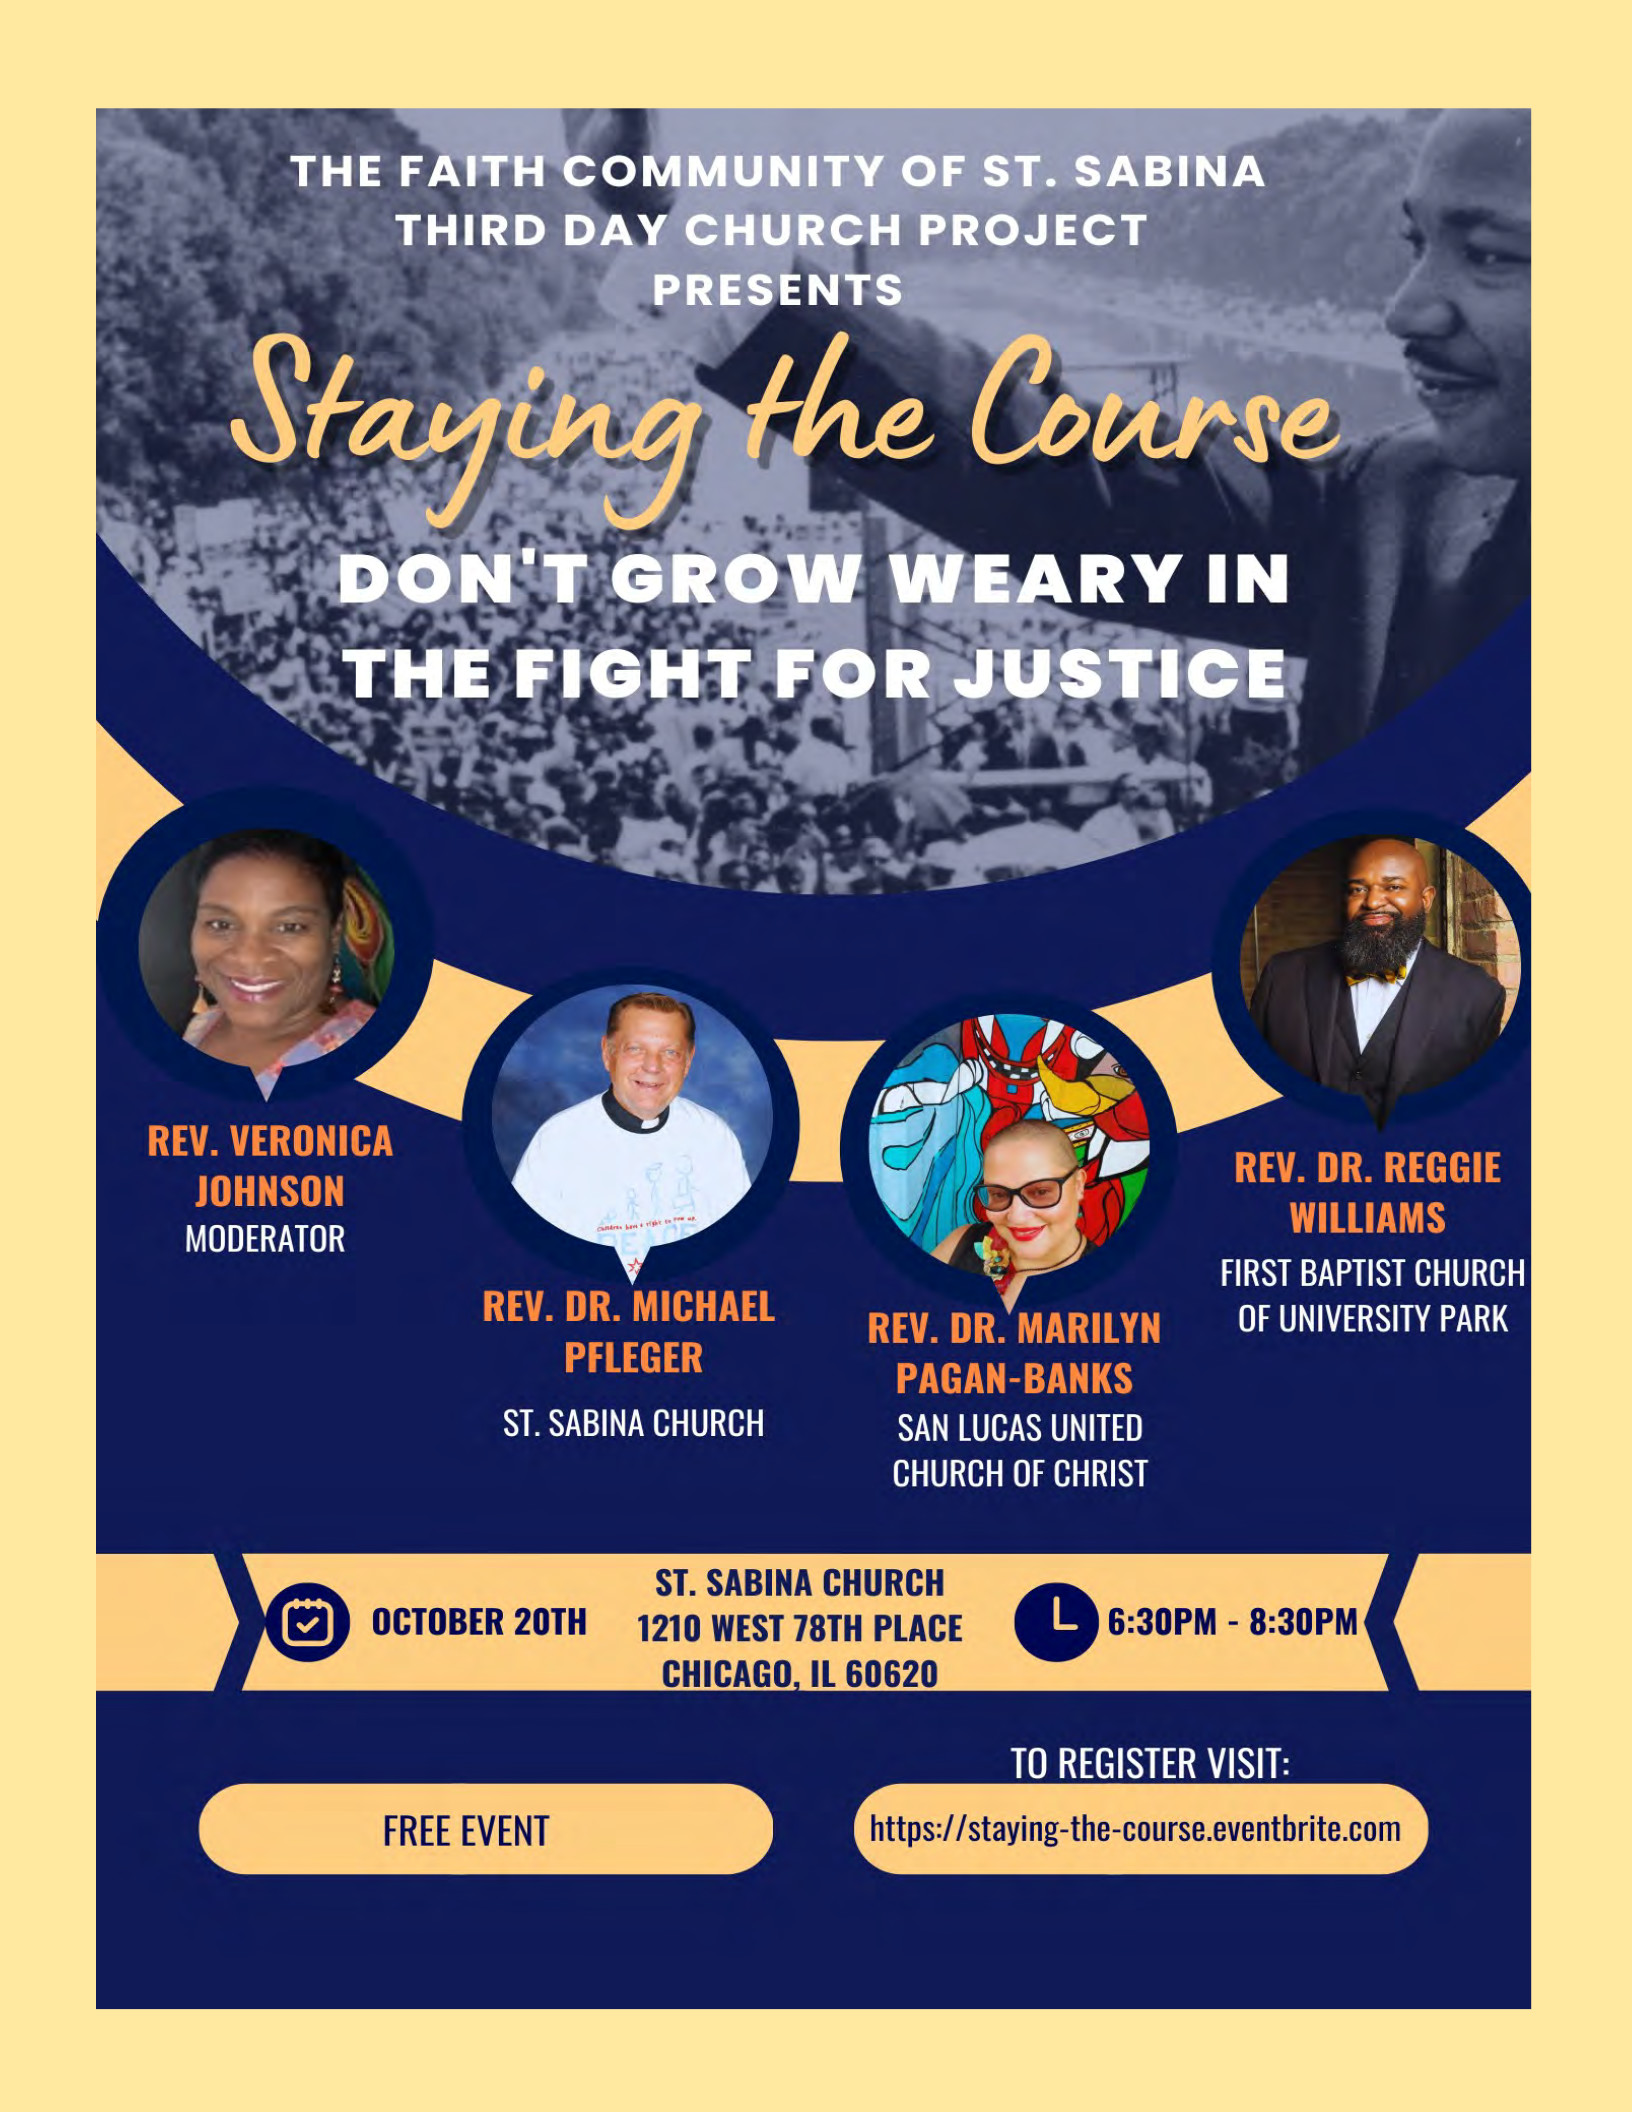 Third Day Church - Staying the Course - Don't Grow Weary in the Fight for Justice - Free - Register 